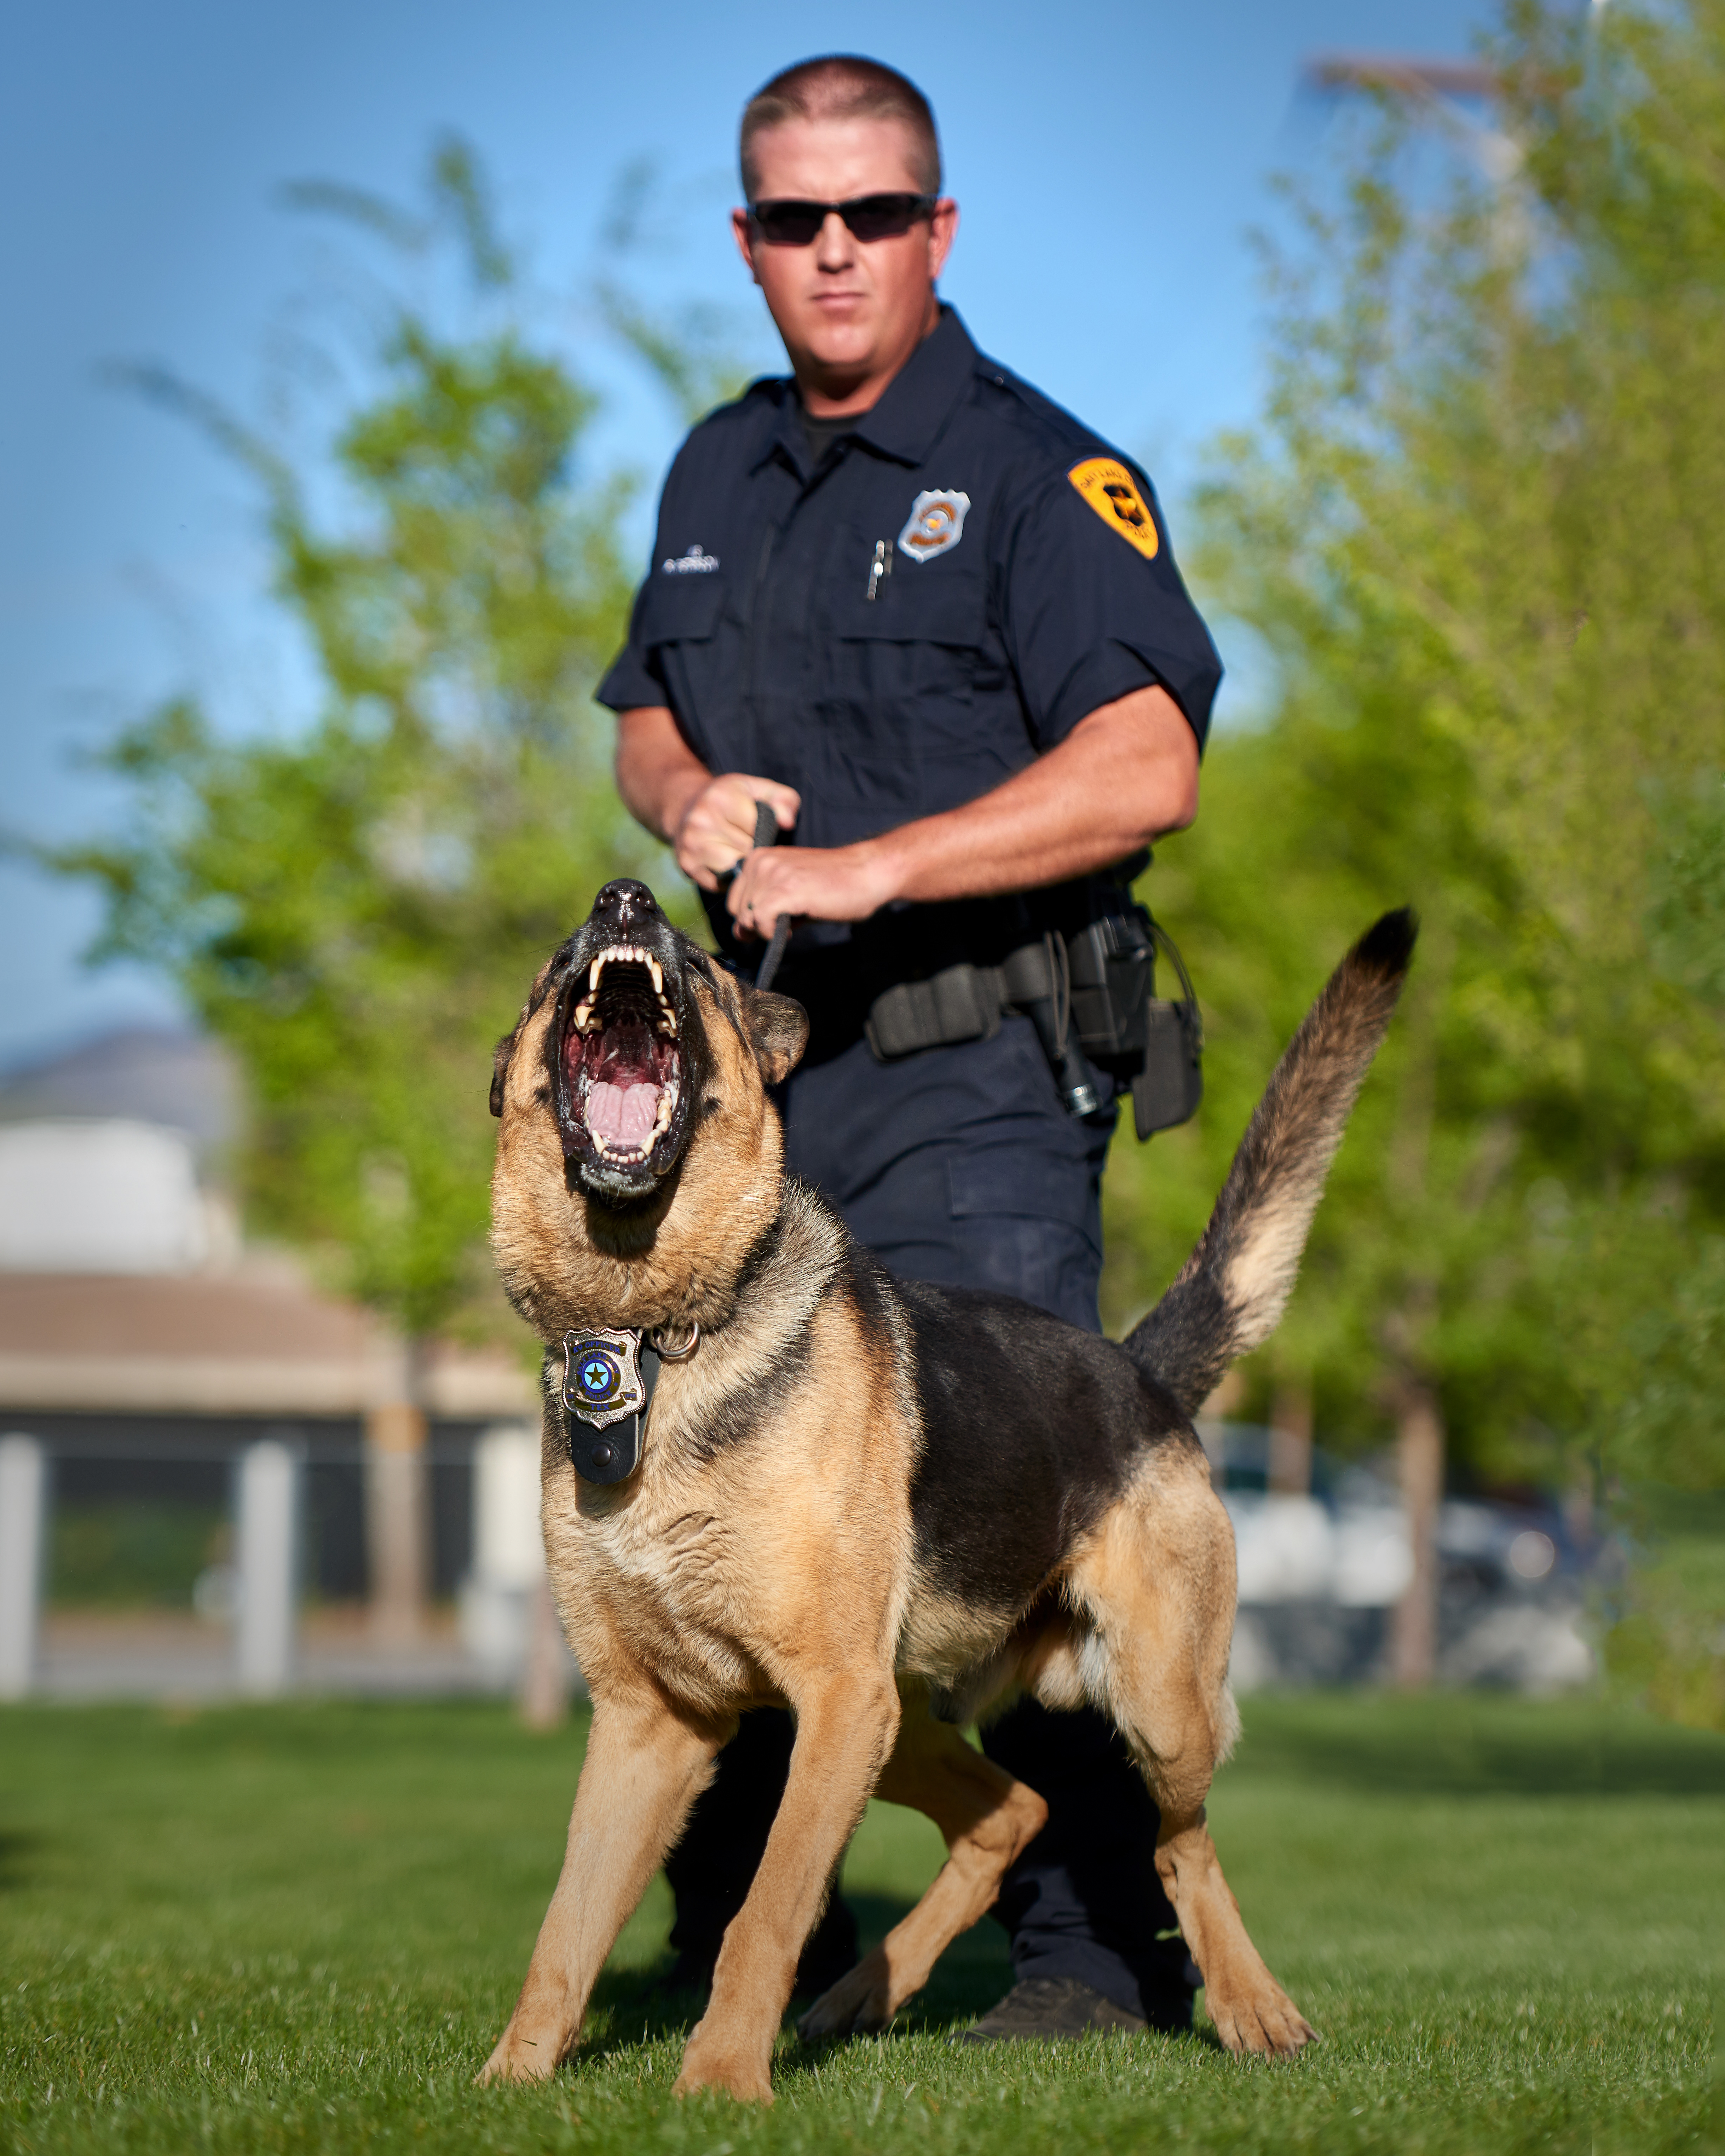 are k9 dogs considered police officers